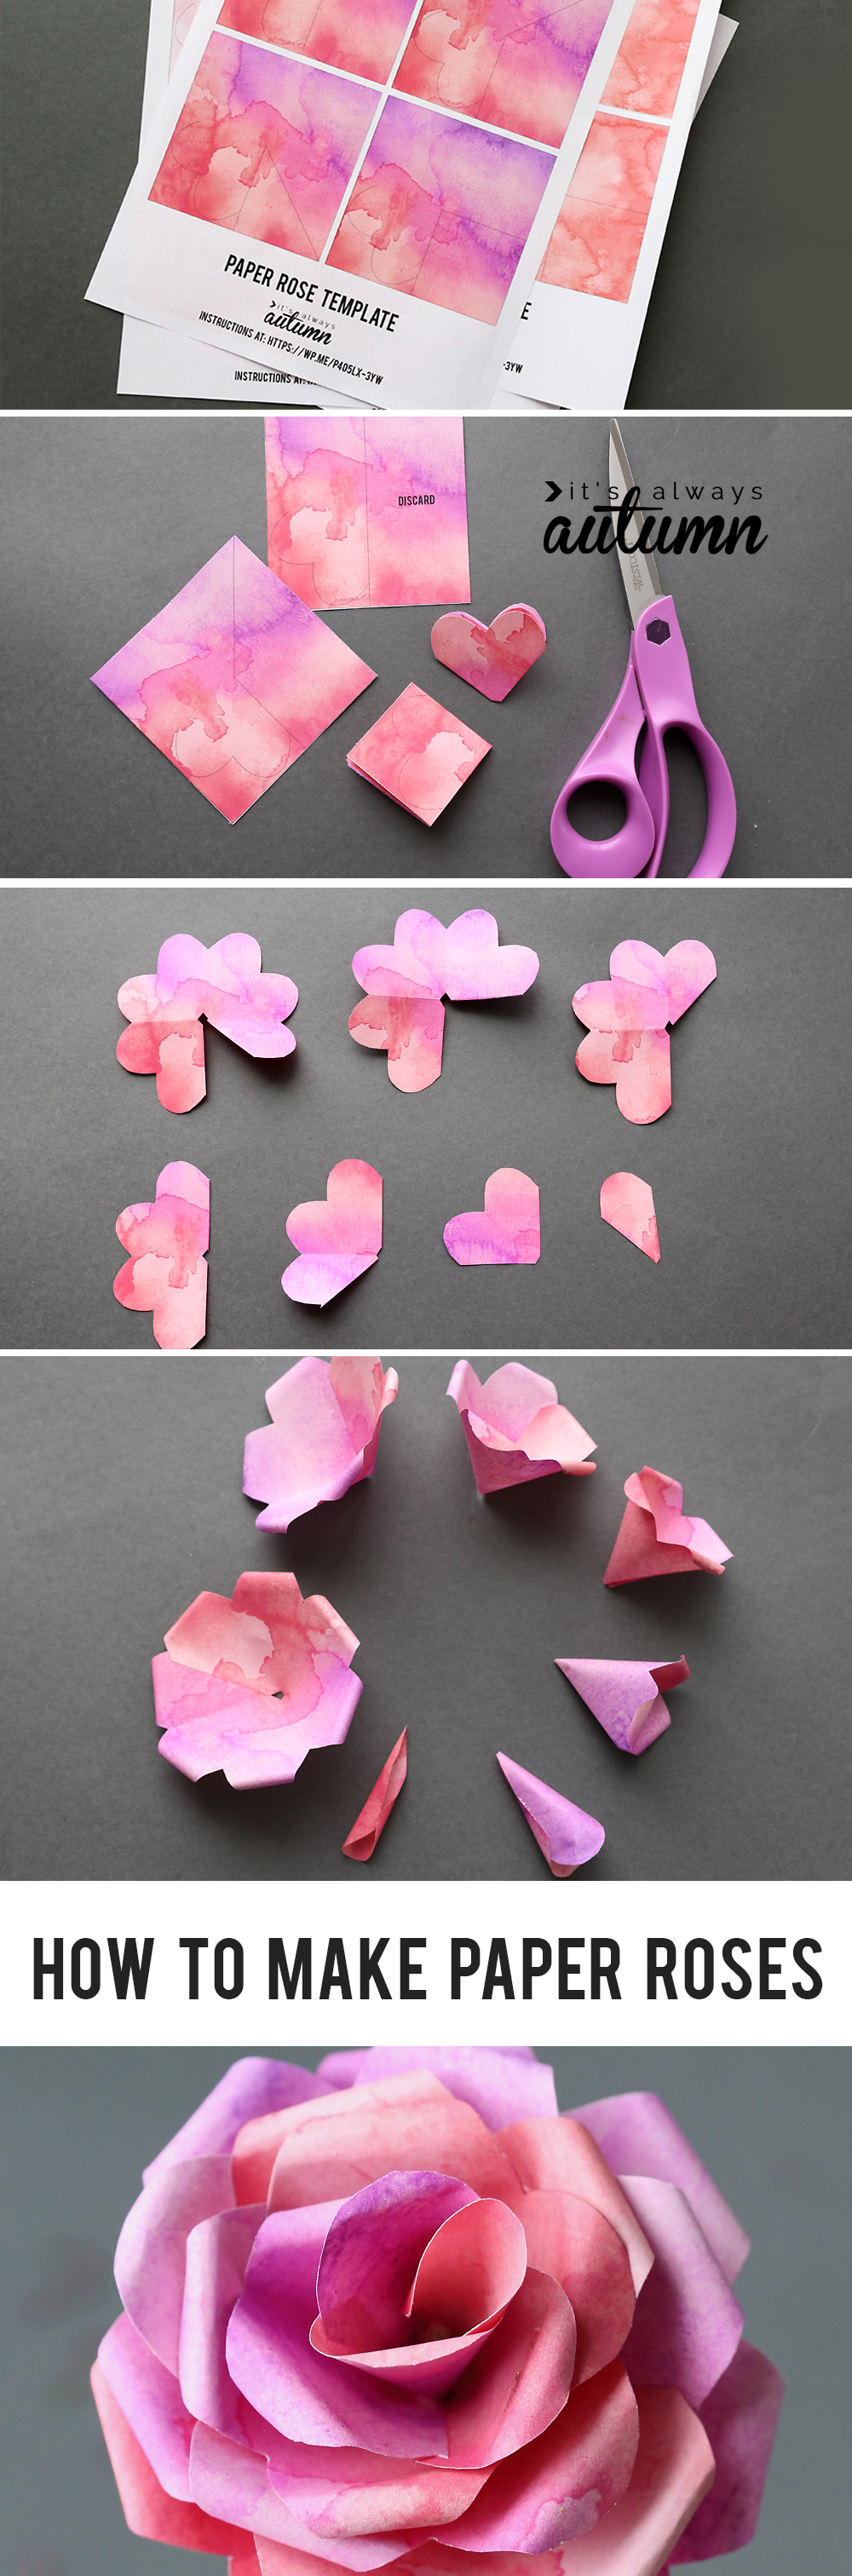 How To Make A Flower Origami Easy Make Gorgeous Paper Roses With This Free Paper Rose Template Its